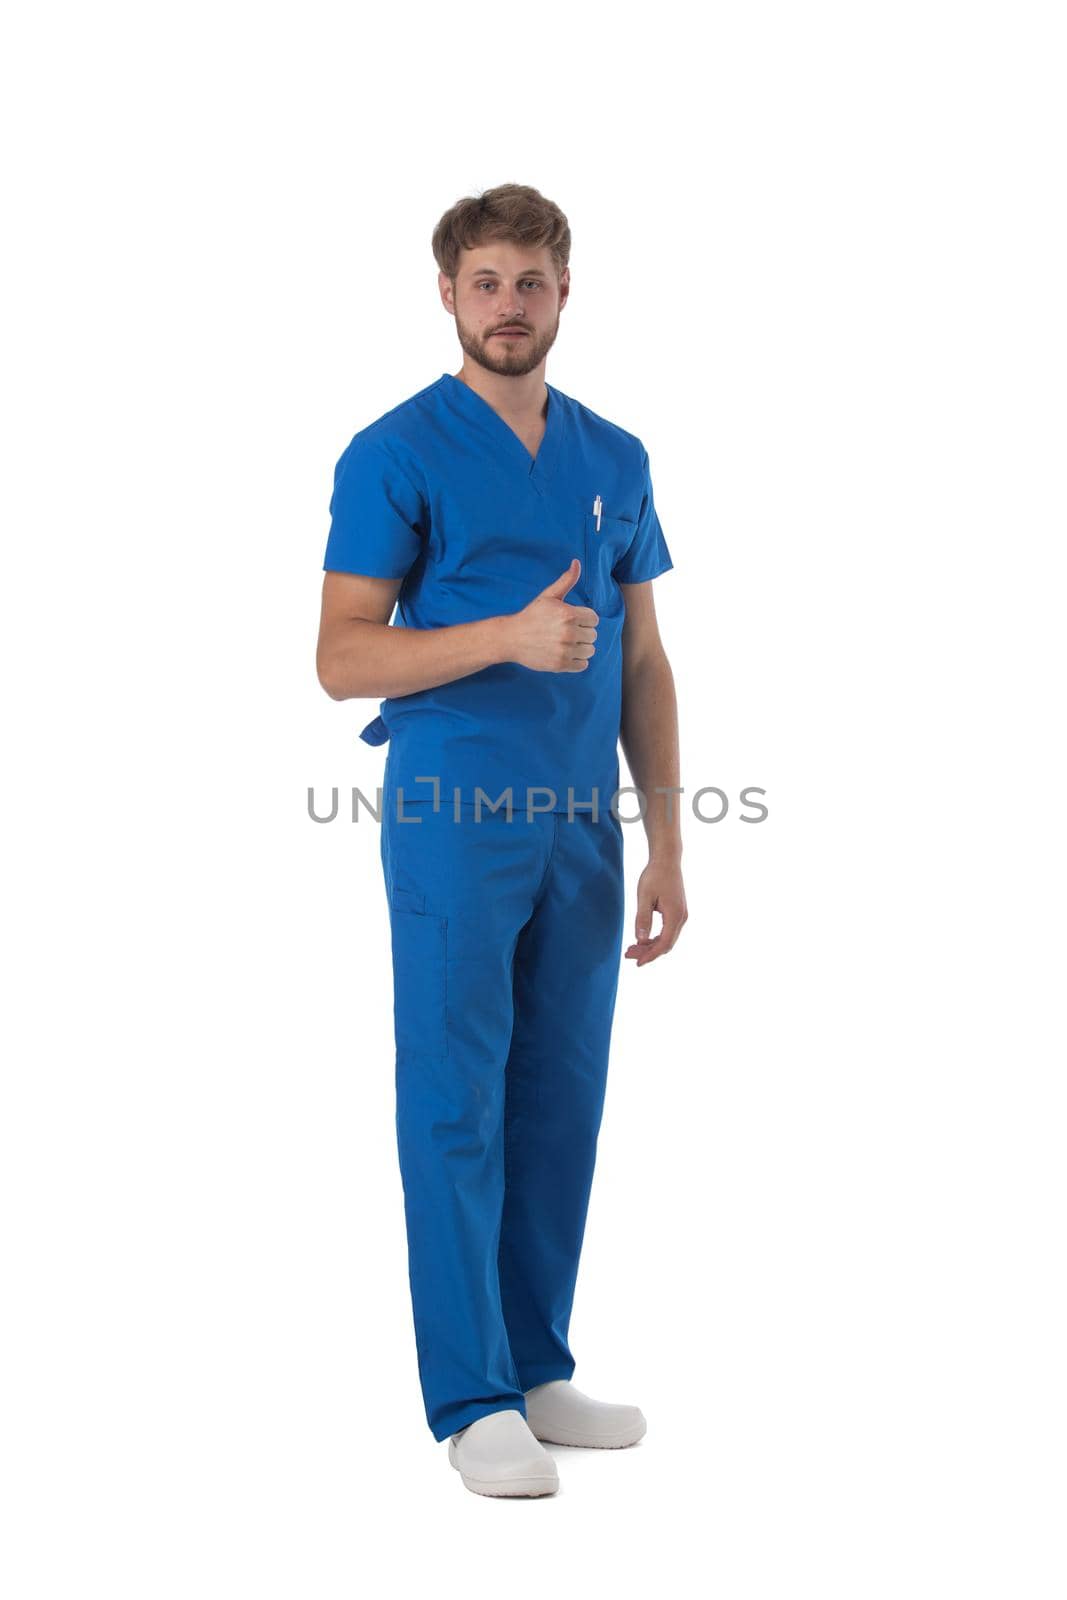 Male nurse or doctor in blue uniform with thumb up studio full length portrait isolated on white background